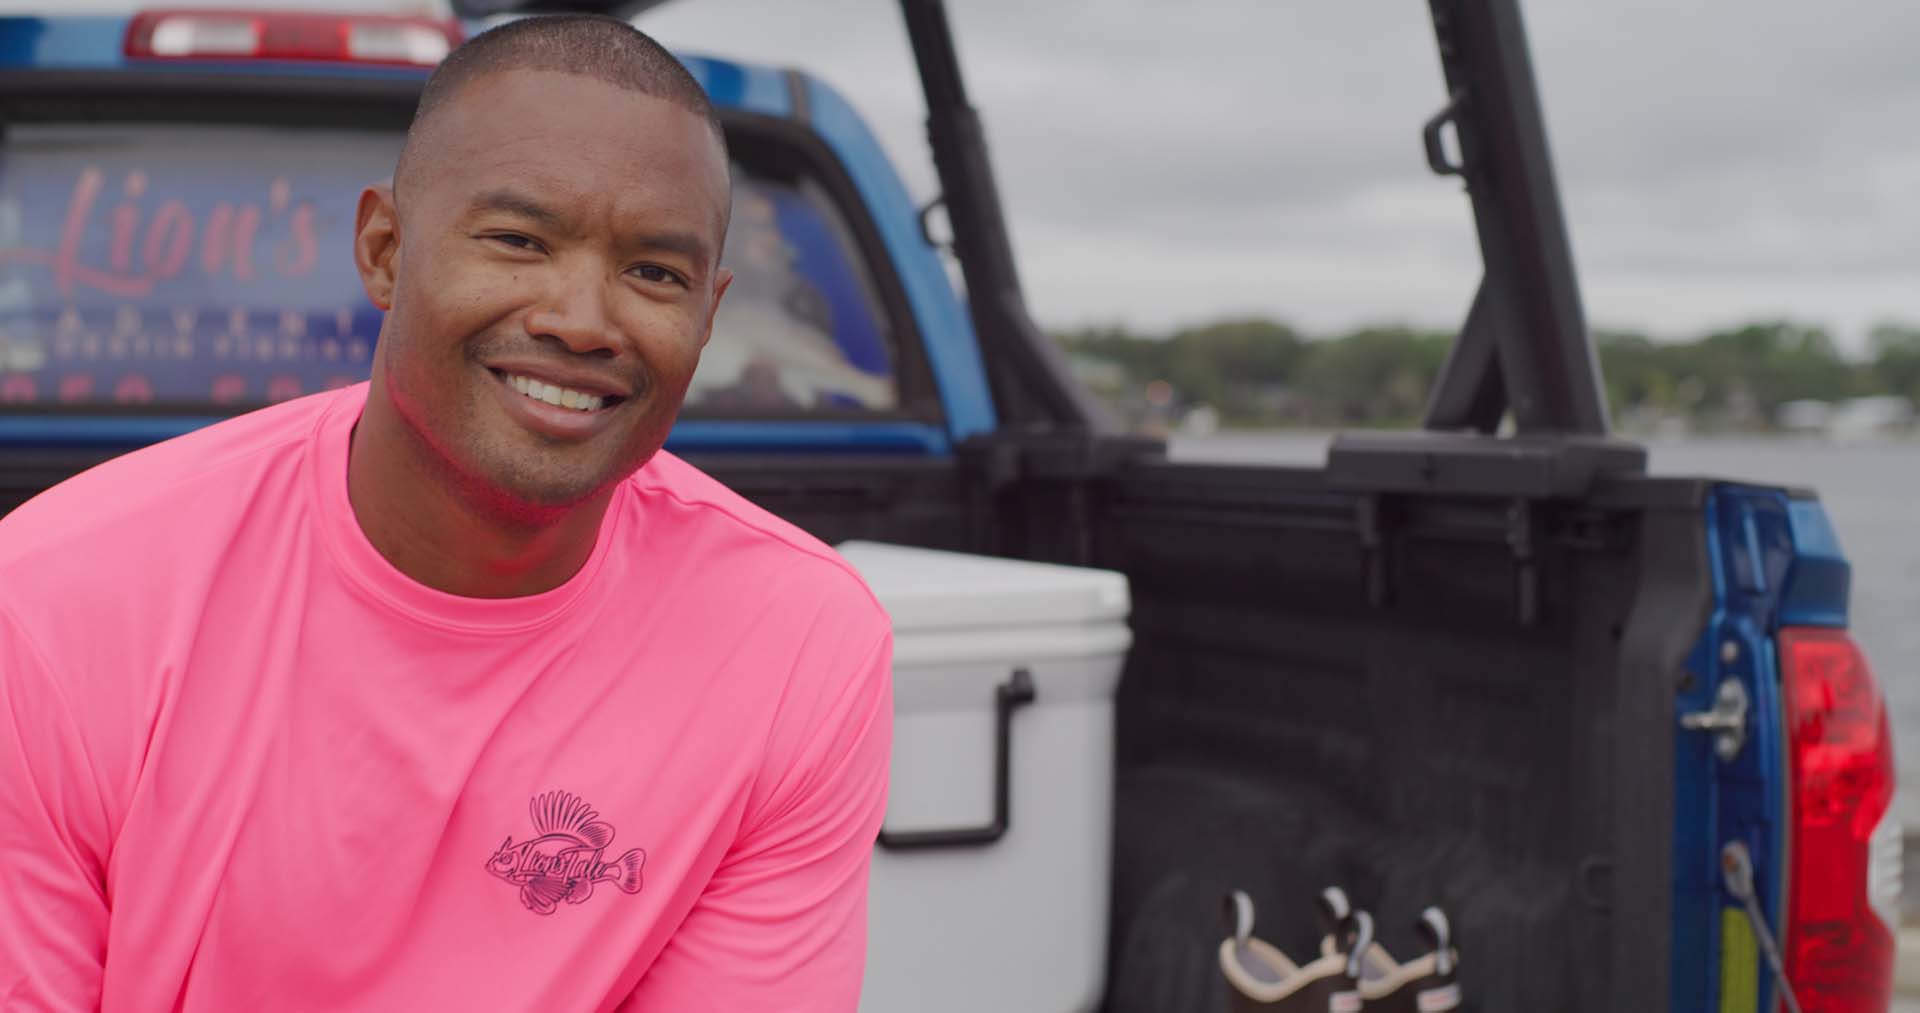 Lionel, in a bright pink shirt sitting on the bed of a pickup truck